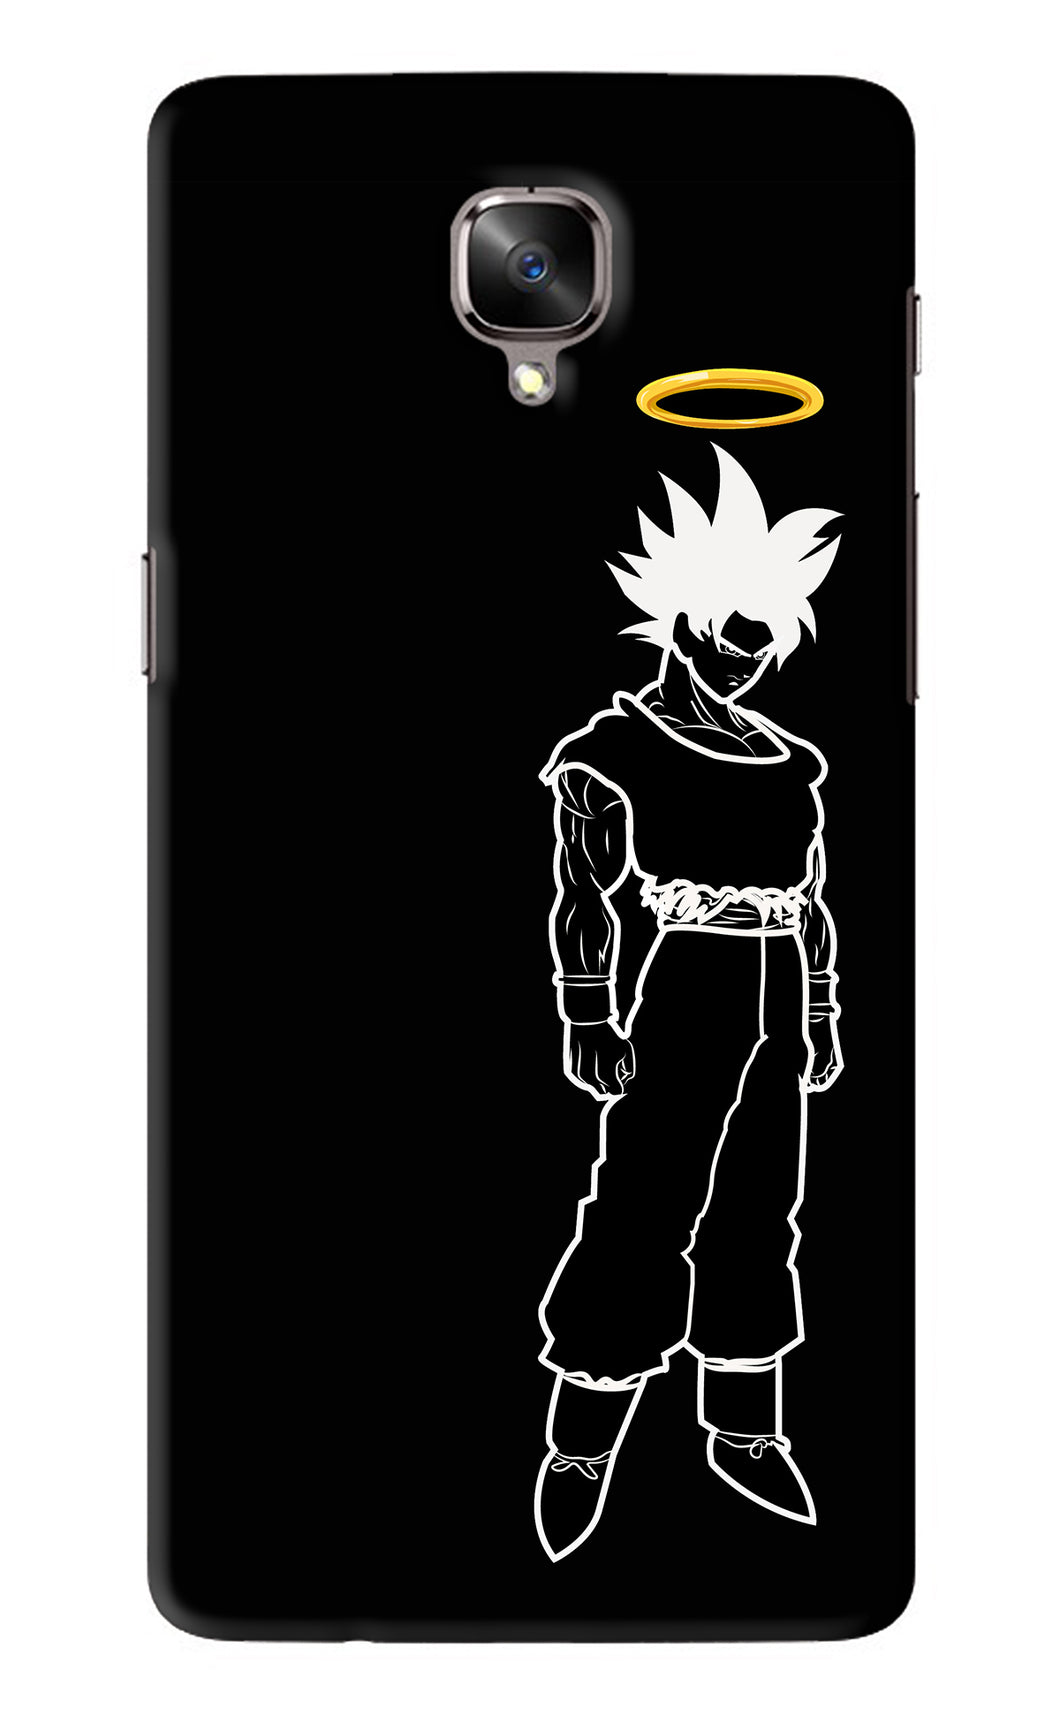 DBS Character OnePlus 3T Back Skin Wrap